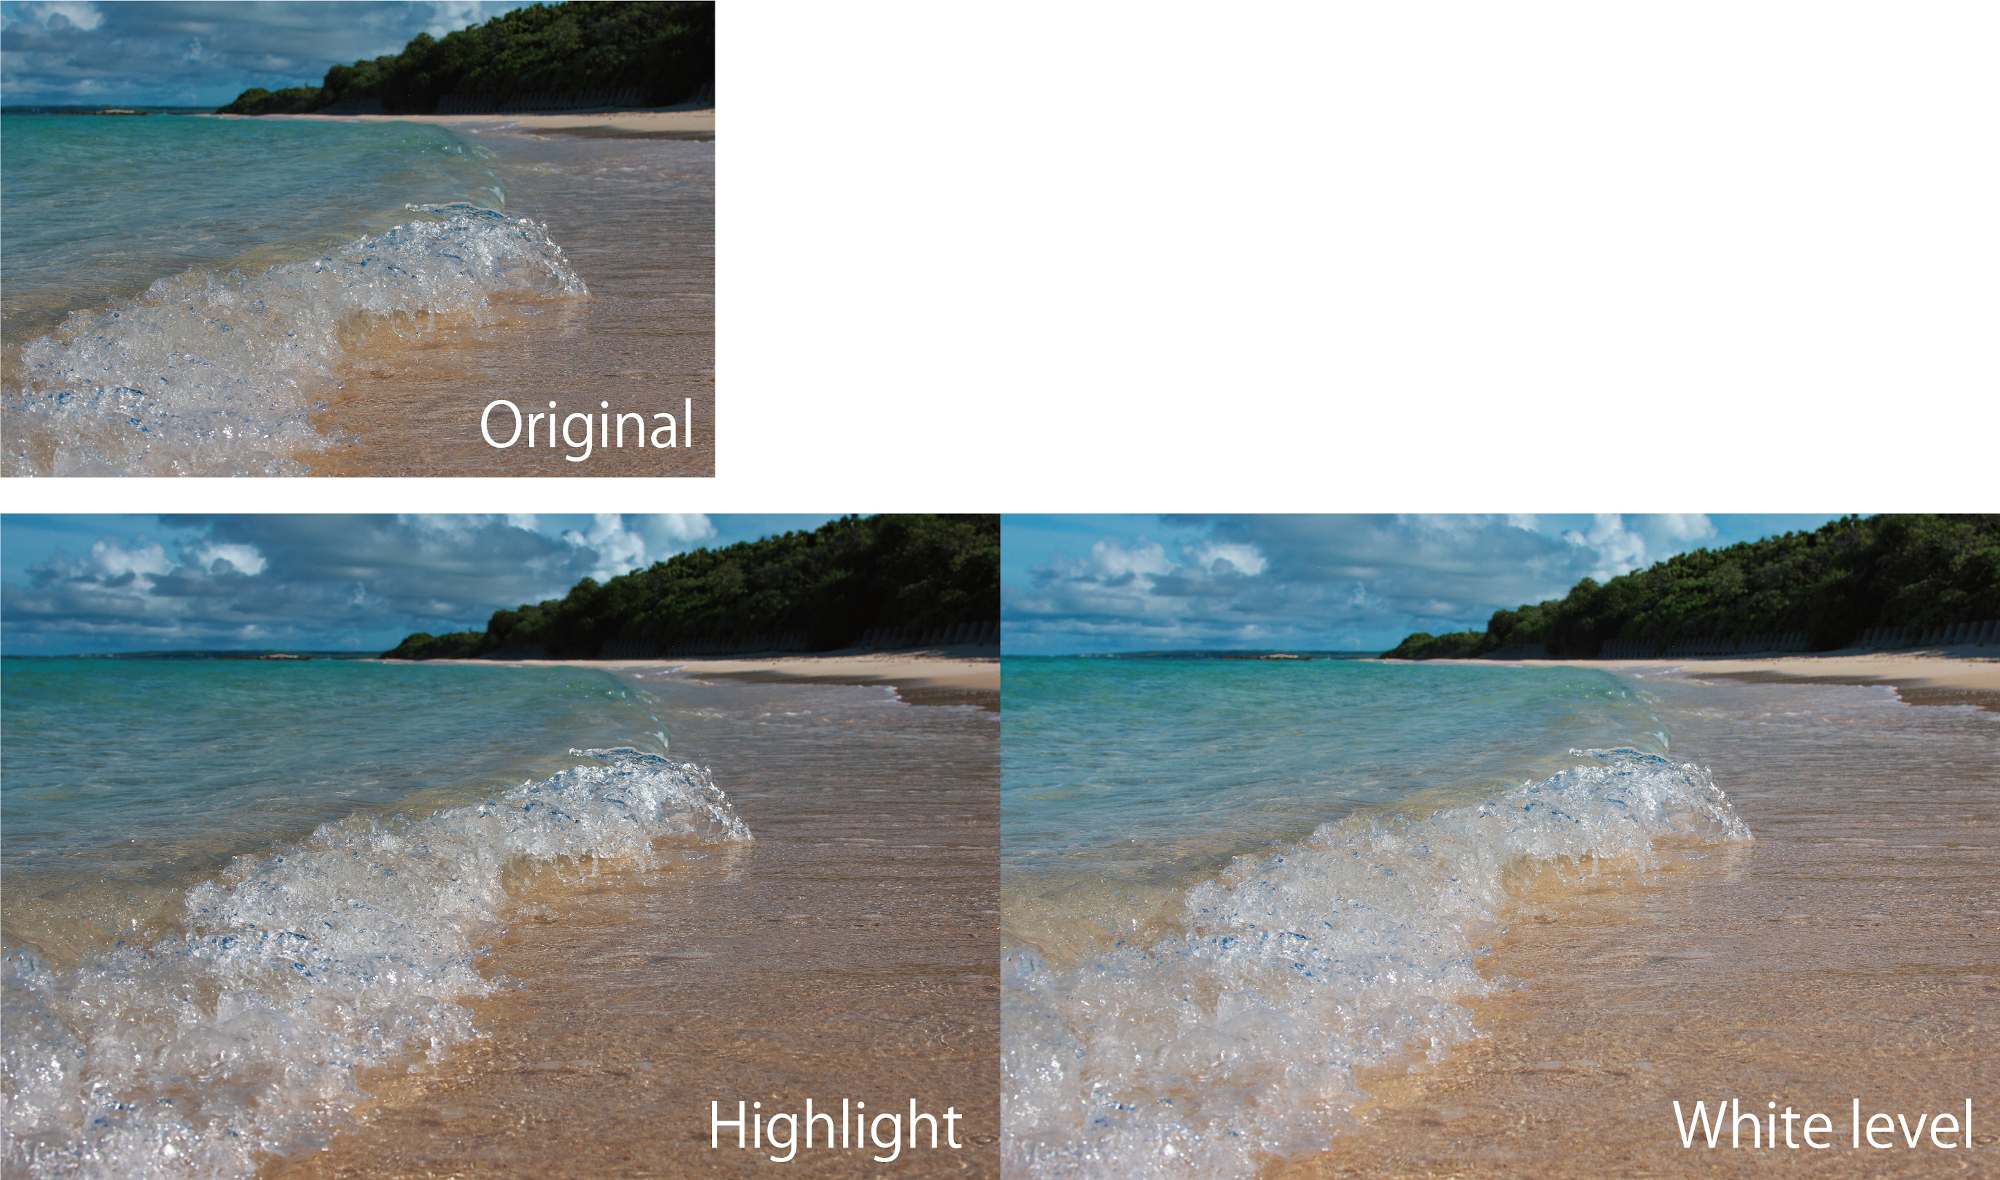 Differences Between the White Level and the Highlight